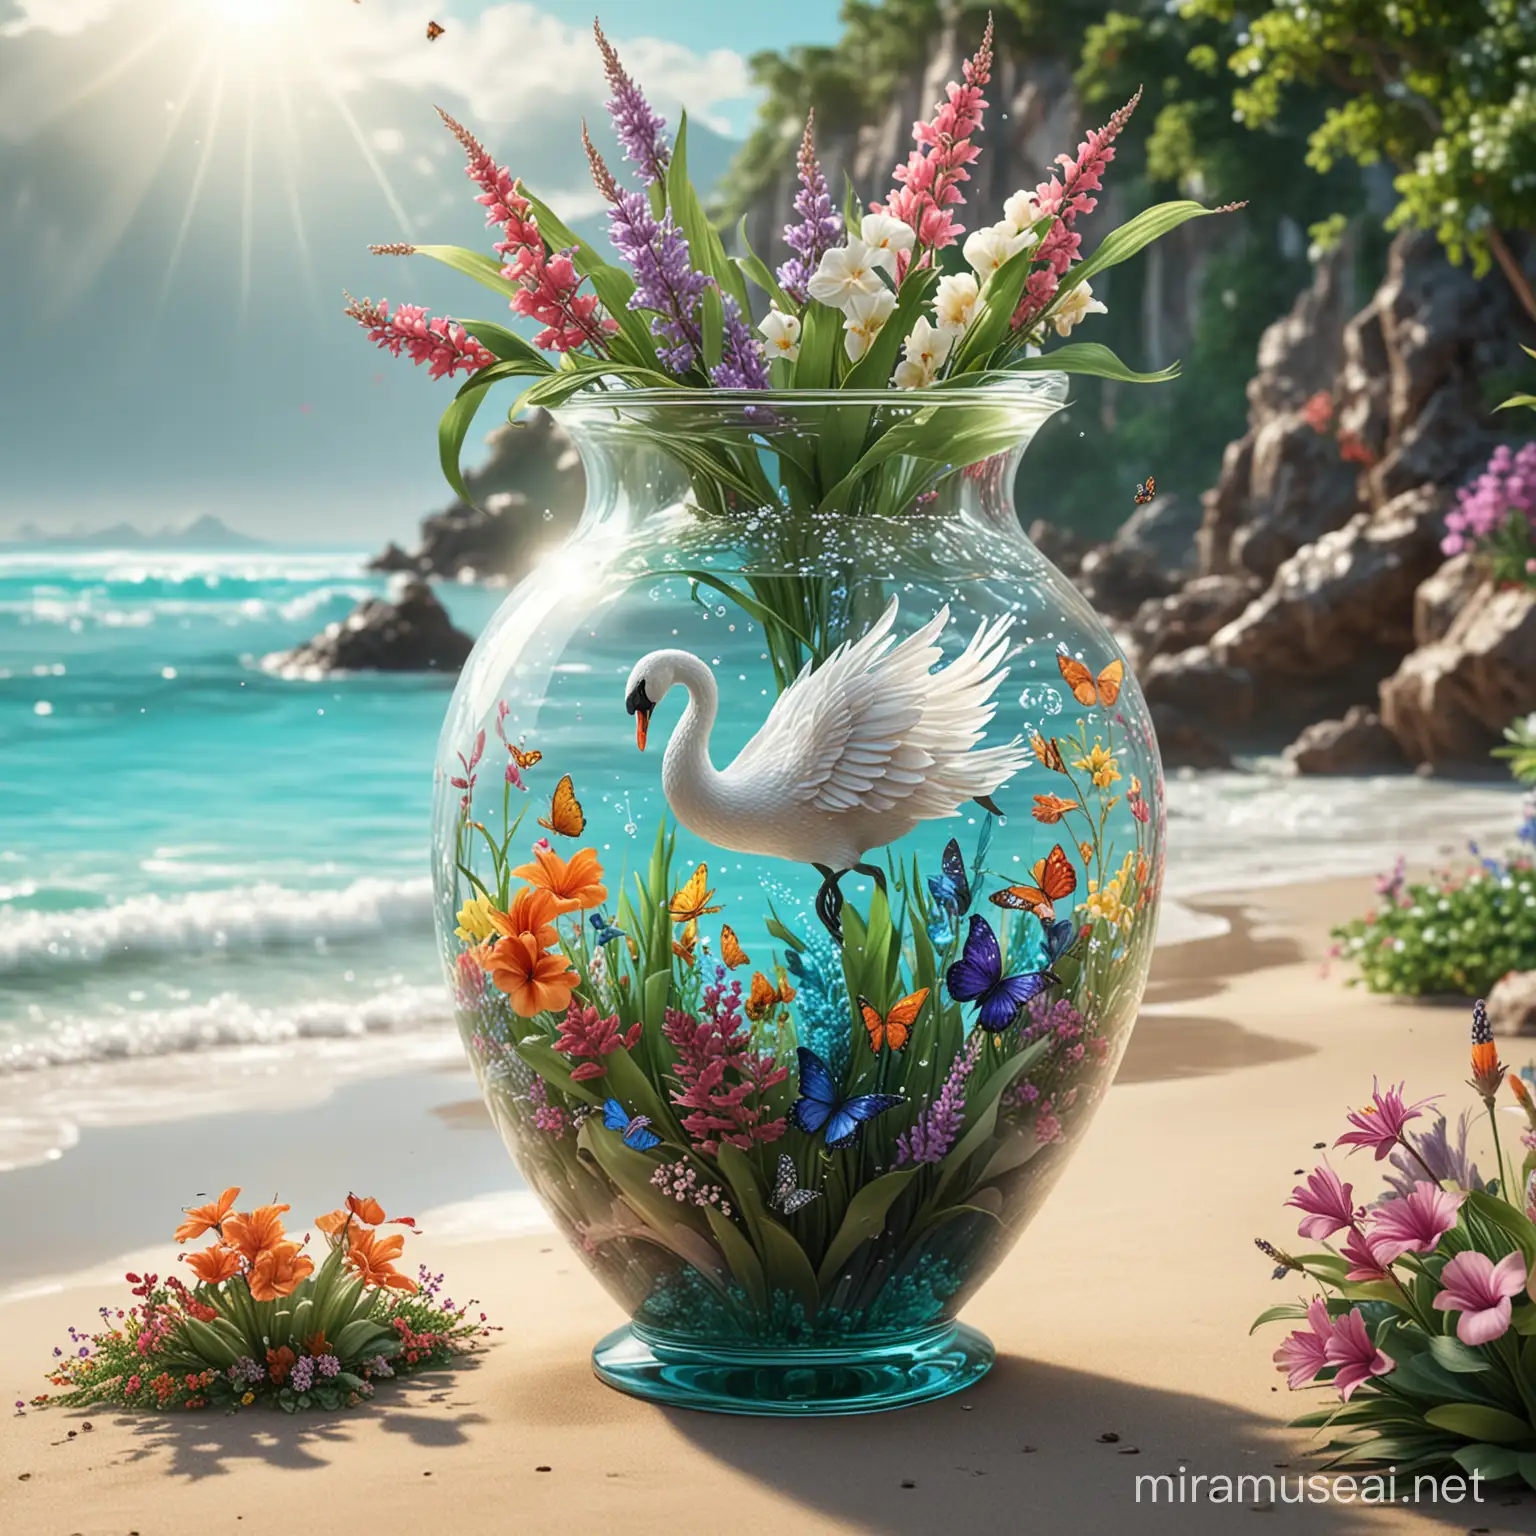 Exquisite 8K Ultra HD 3D Glass Swan Vase with Mermaid and Butterflies by the Beach